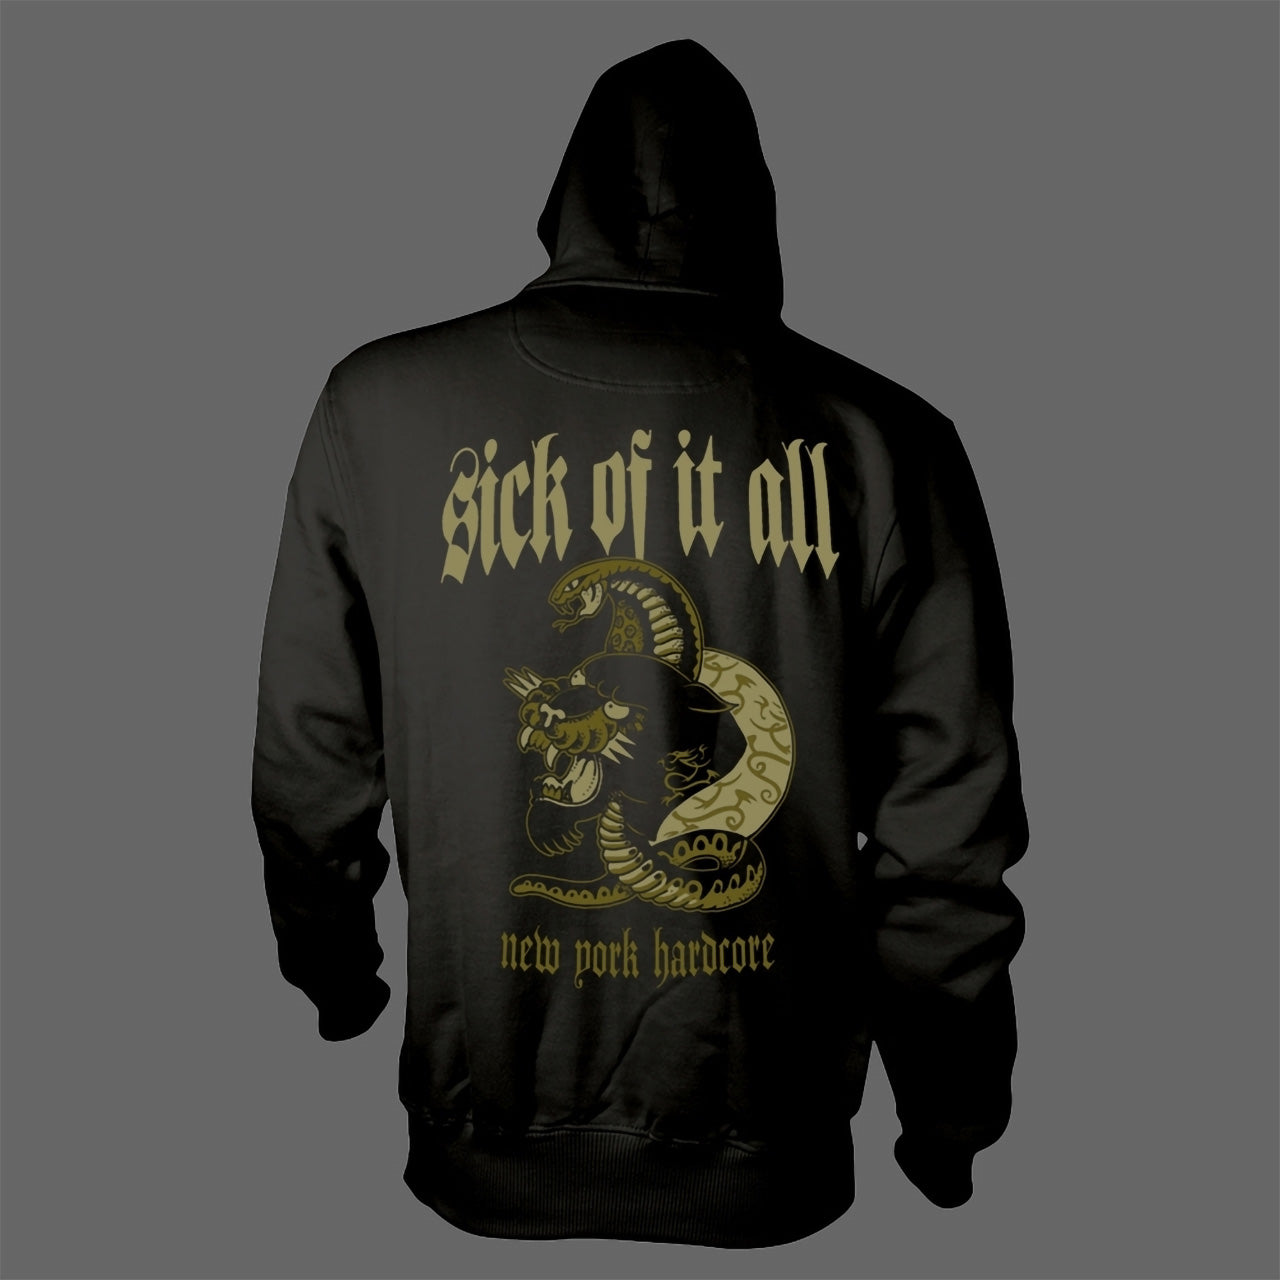 Sick of It All - Panther (Hoodie)